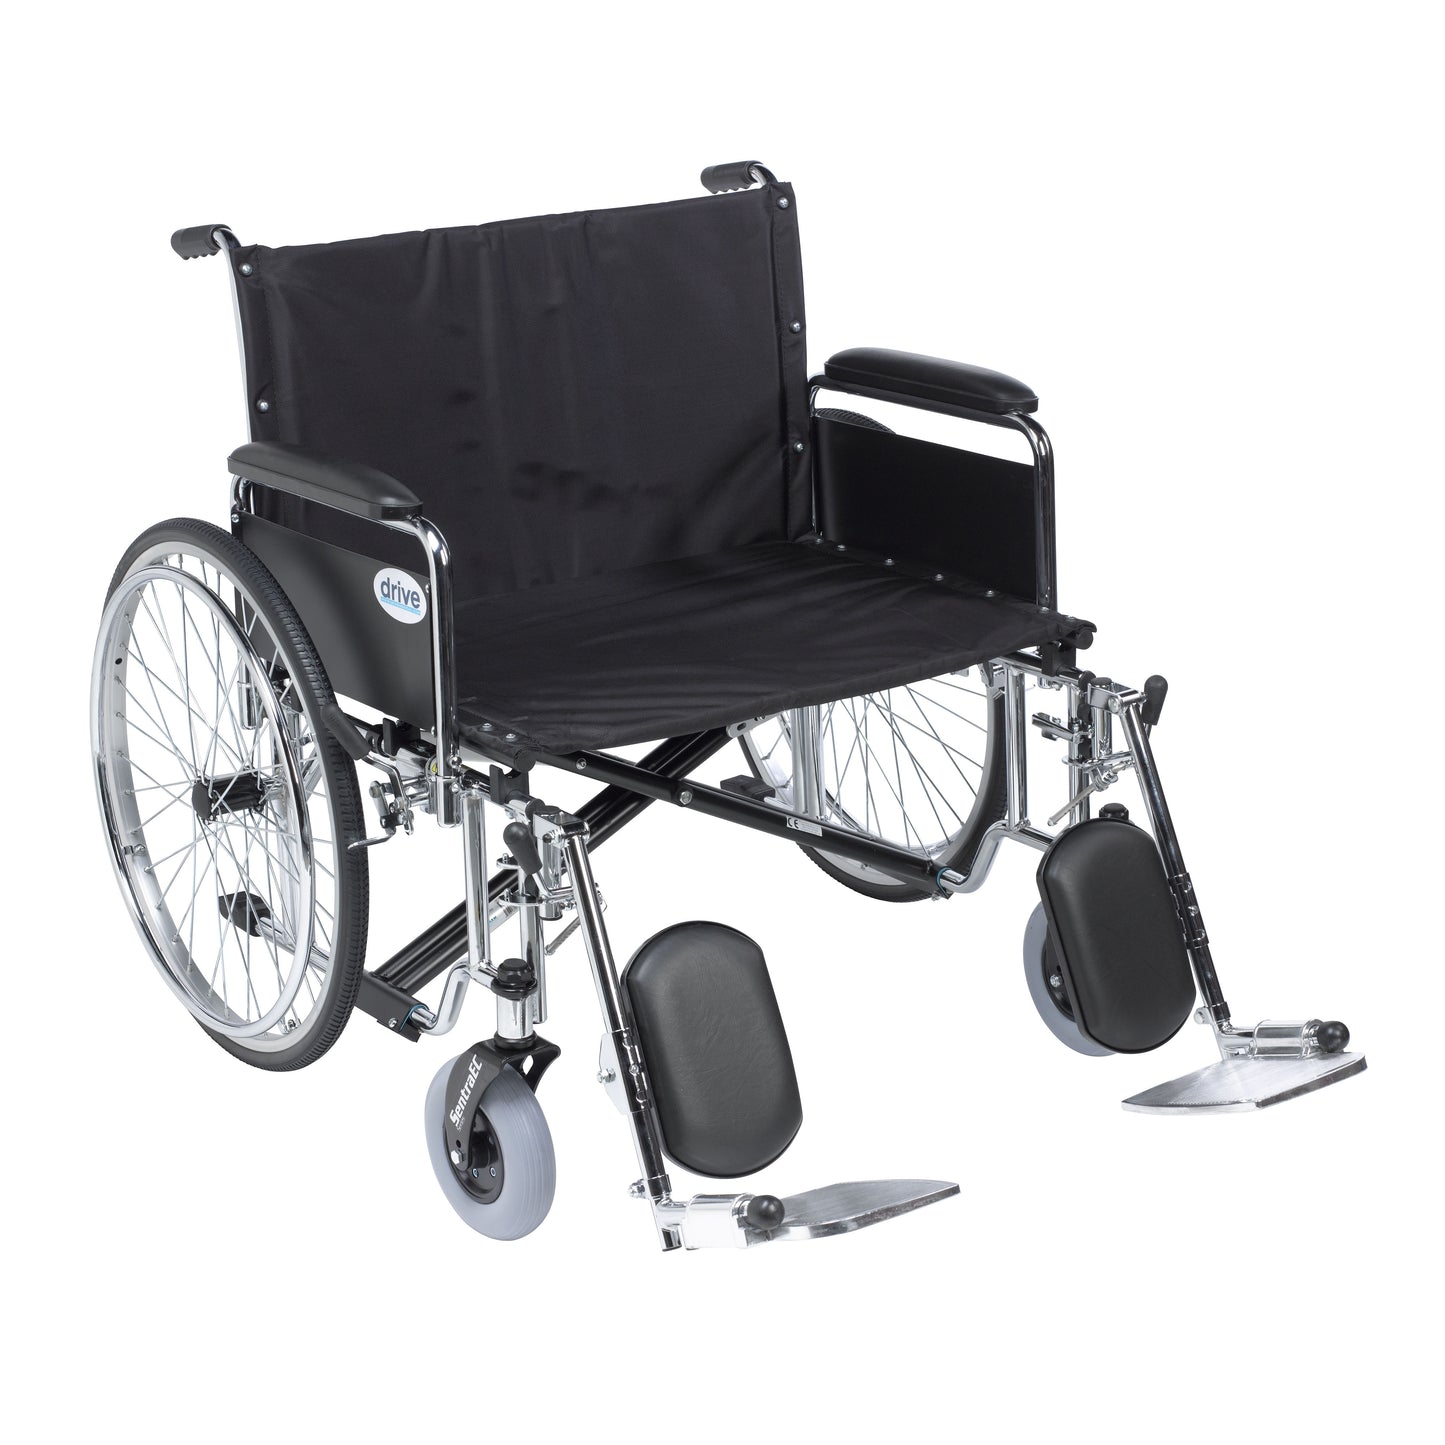 Sentra EC Heavy Duty Extra Wide Wheelchair, Detachable Full Arms, Elevating Leg Rests, 26" Seat